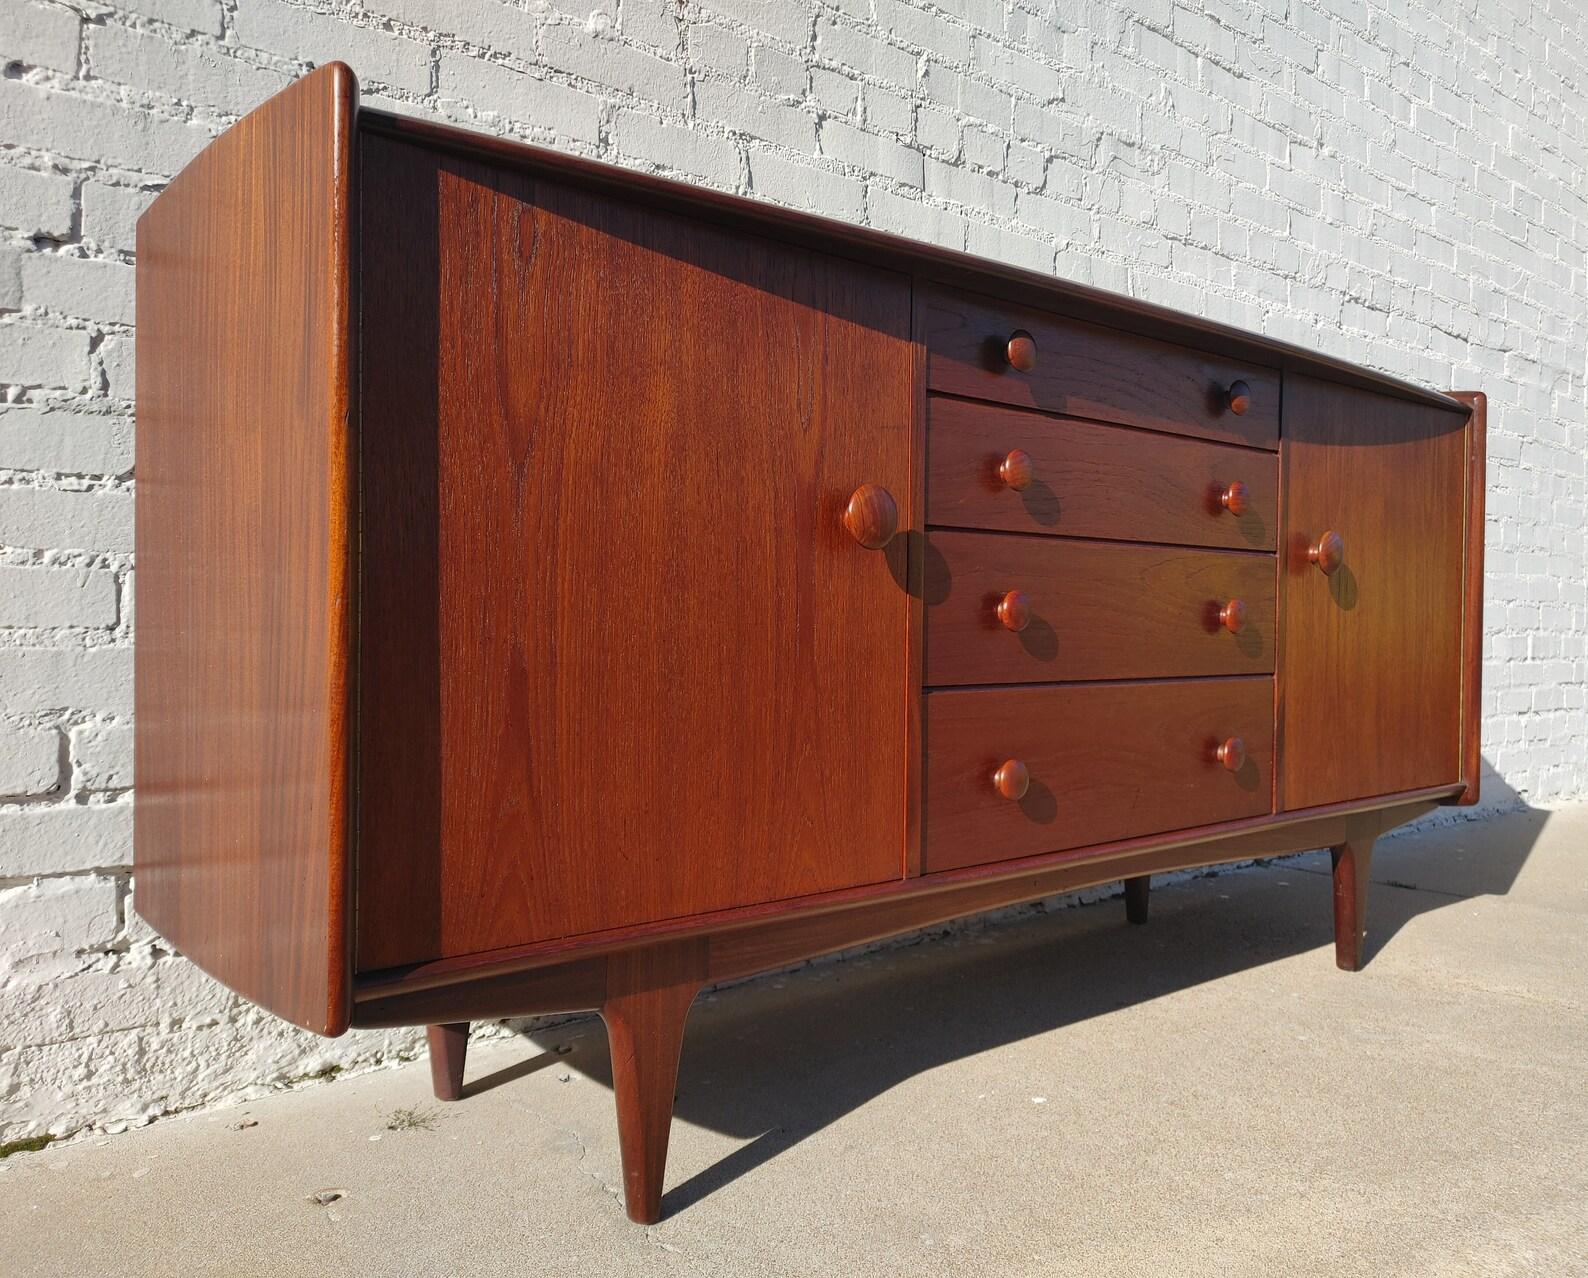 Mid Century Modern Teak Buffet by Younger

Above average vintage condition and structurally sound. Has some expected slight finish wear and scratching.
Additional information:
Materials: Teak
Vintage from the 1960s
Dimensions: 66  W x 19  D x 32 H in